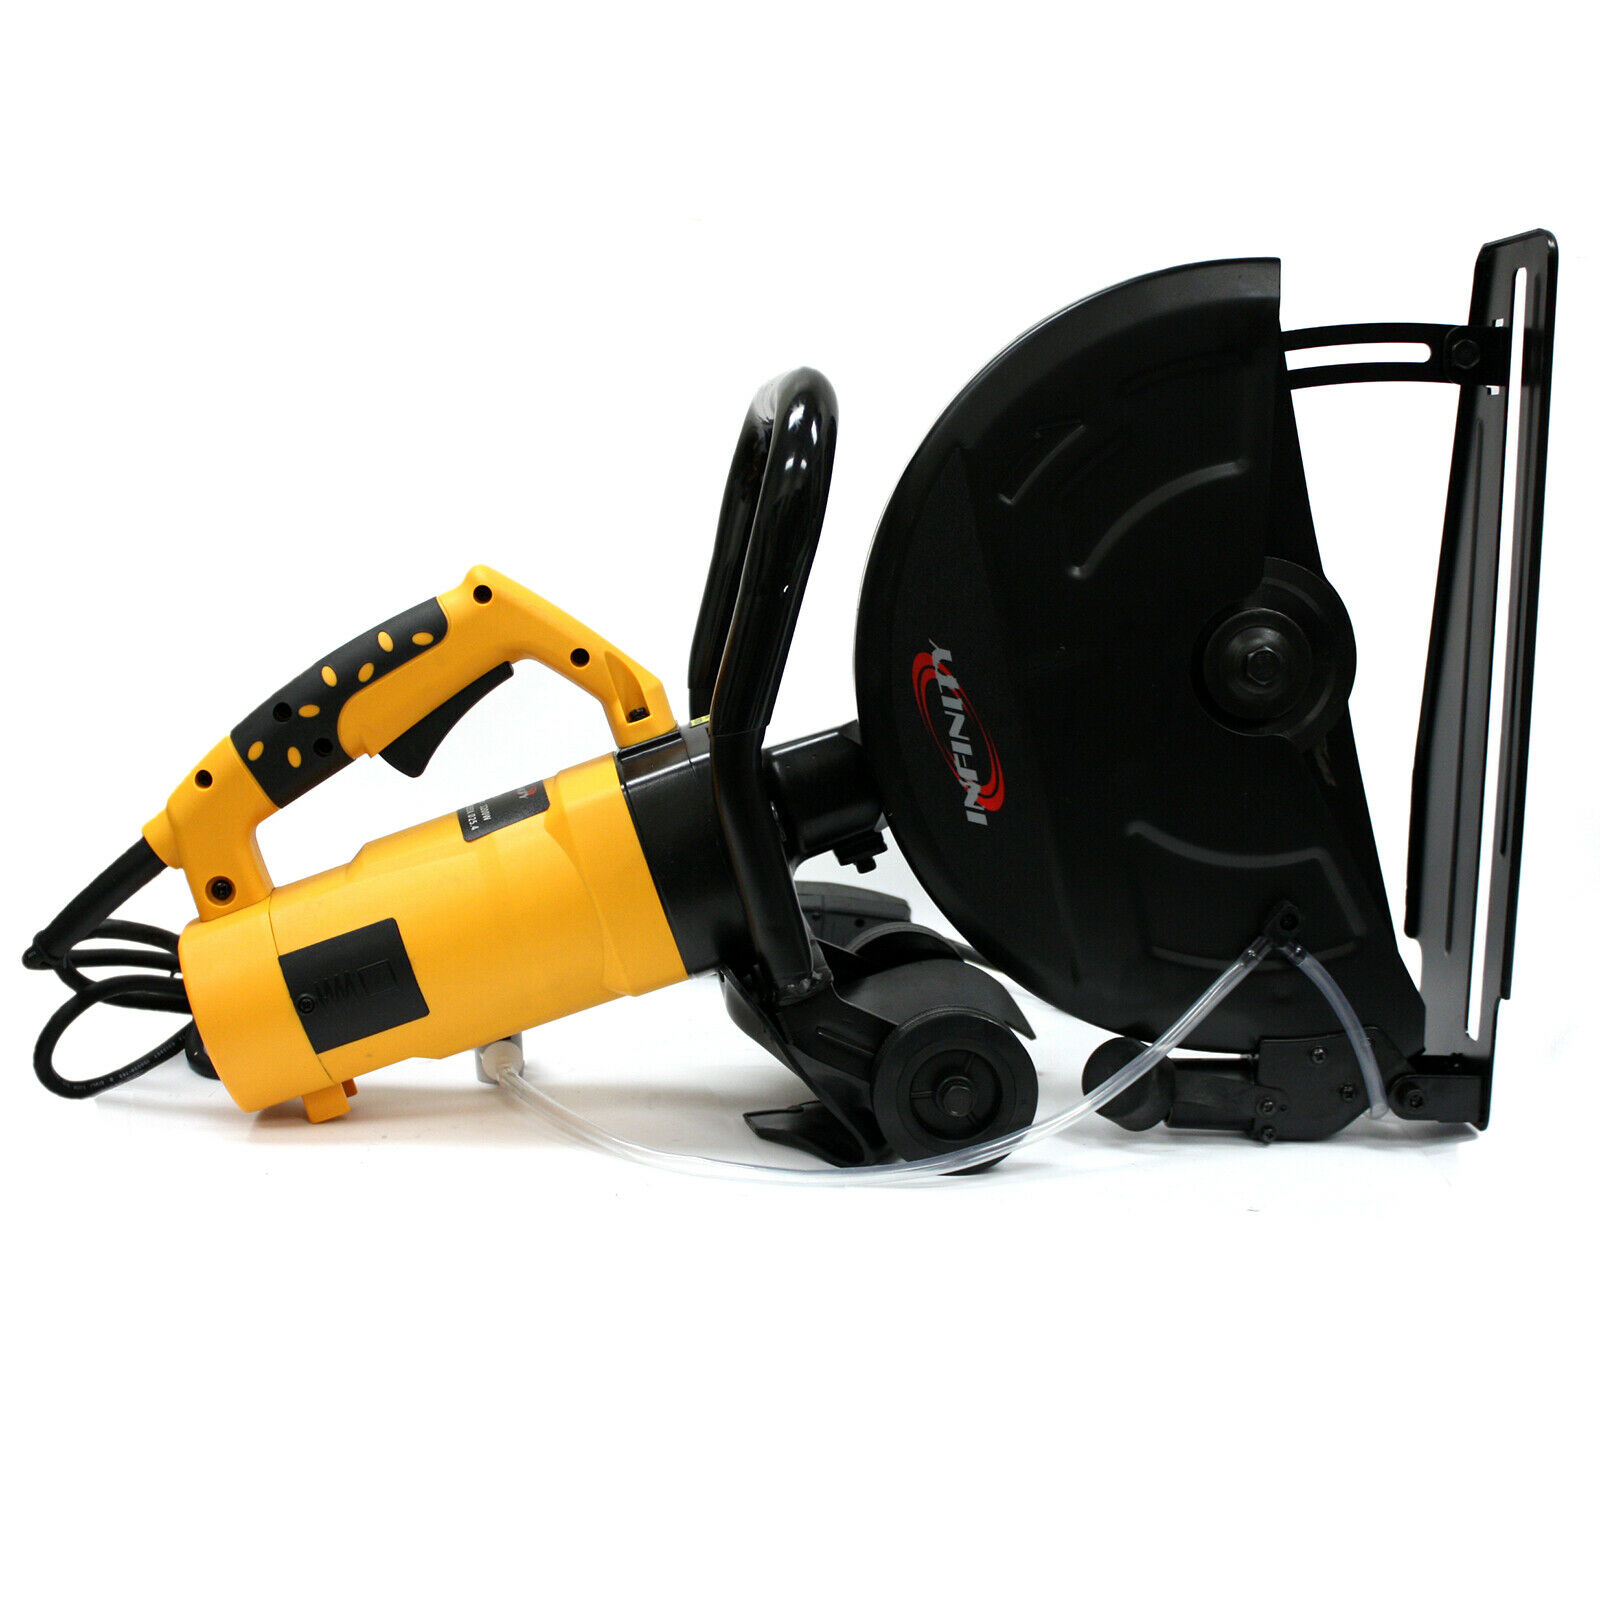 Details about   14" Portable Concrete Saw Corded Electric 4100 RPM w/ Blade 110v 3200W 